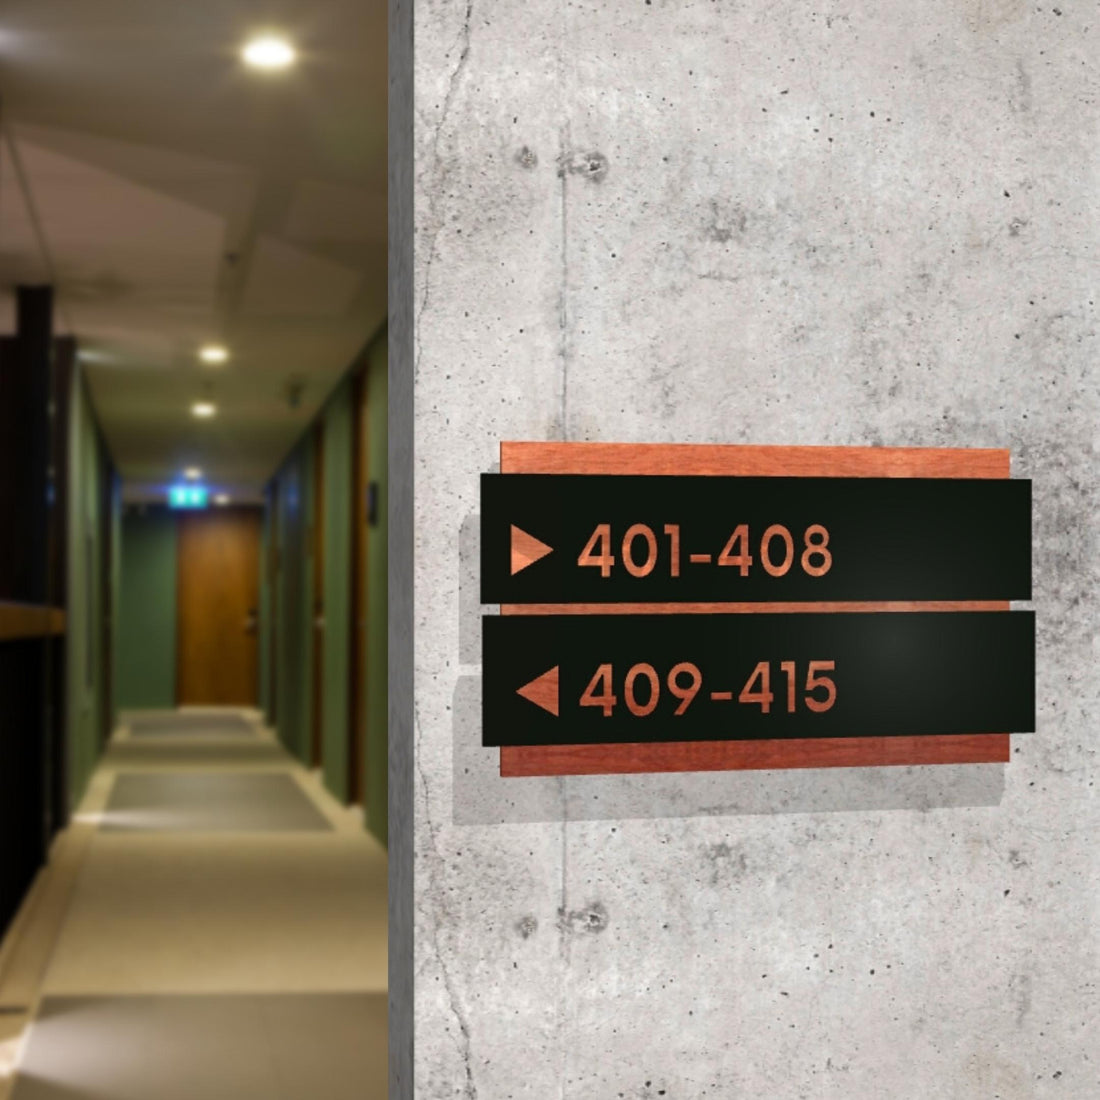 Personalised Wooden & Acrylic Wayfinding/ Location Signage/ Custom Made Directional Sign, Room Name/ Arrow Signs, Number Plaque, Wall Room Plate, Company Signage for Office, Apartment, Hotel, Gym, Restaurant